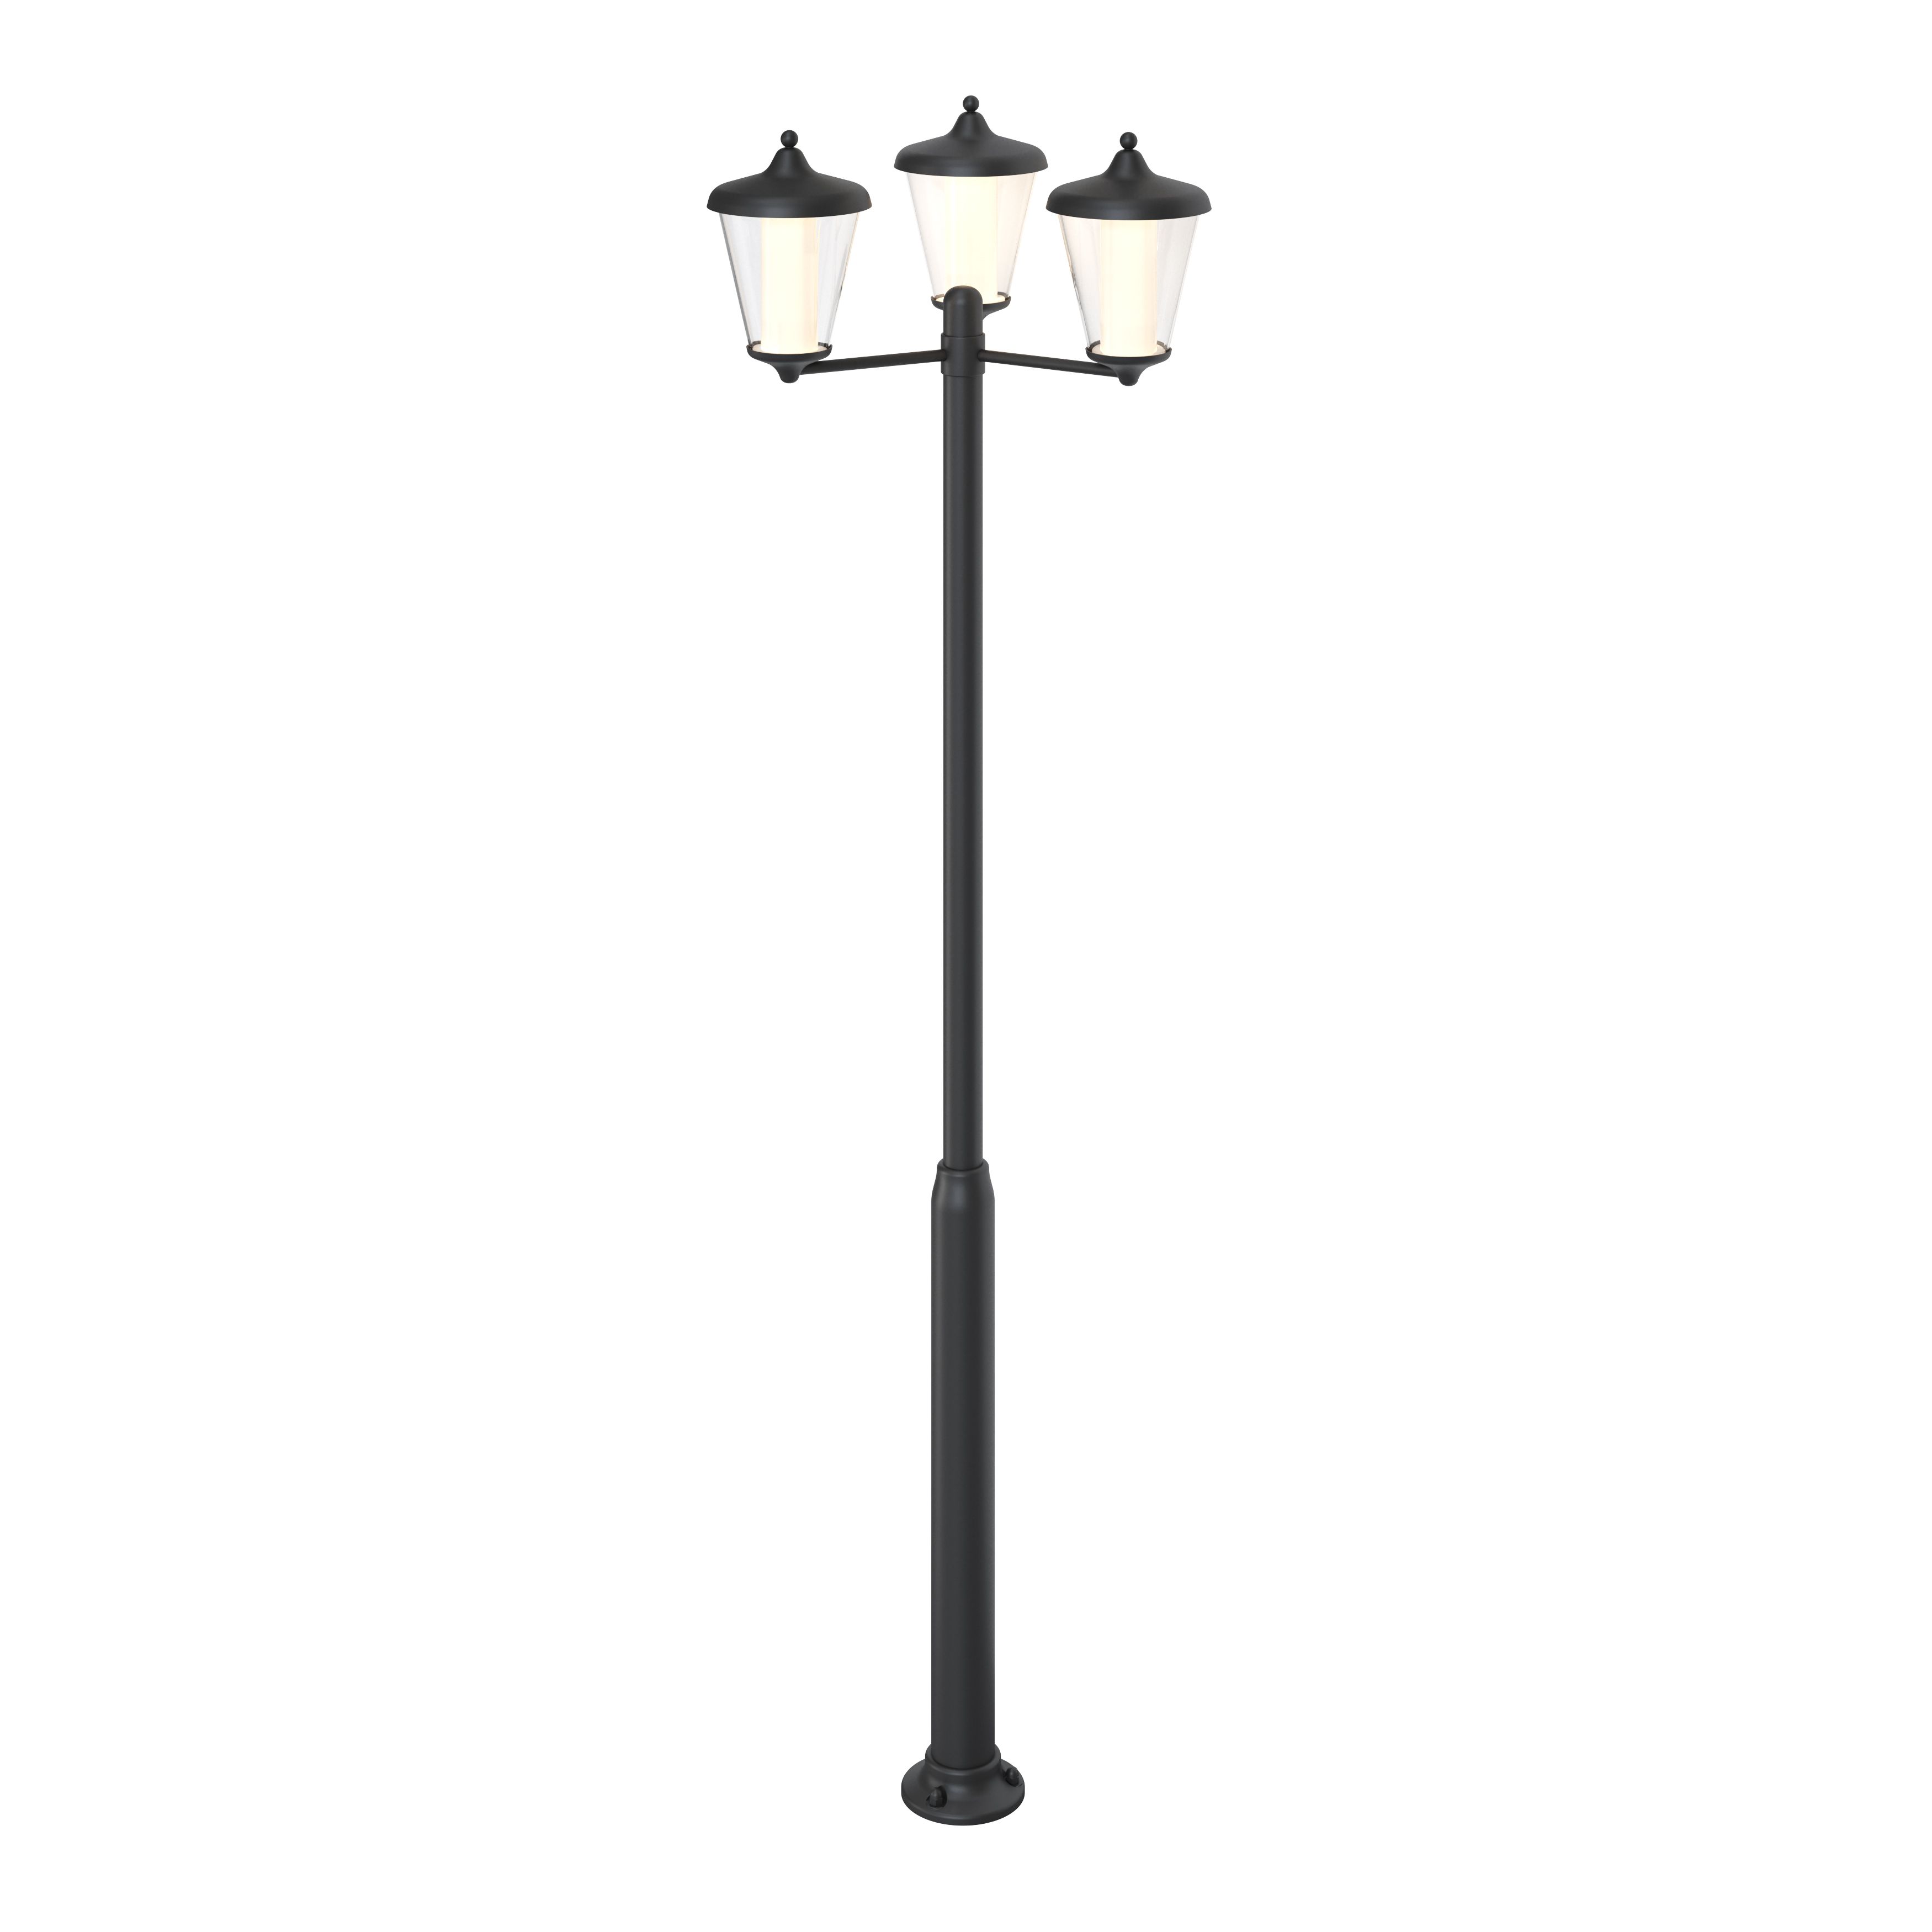 GoodHome Lantern Dark grey Mains-powered 3 lamp Integrated LED Outdoor Post light (H)2100mm